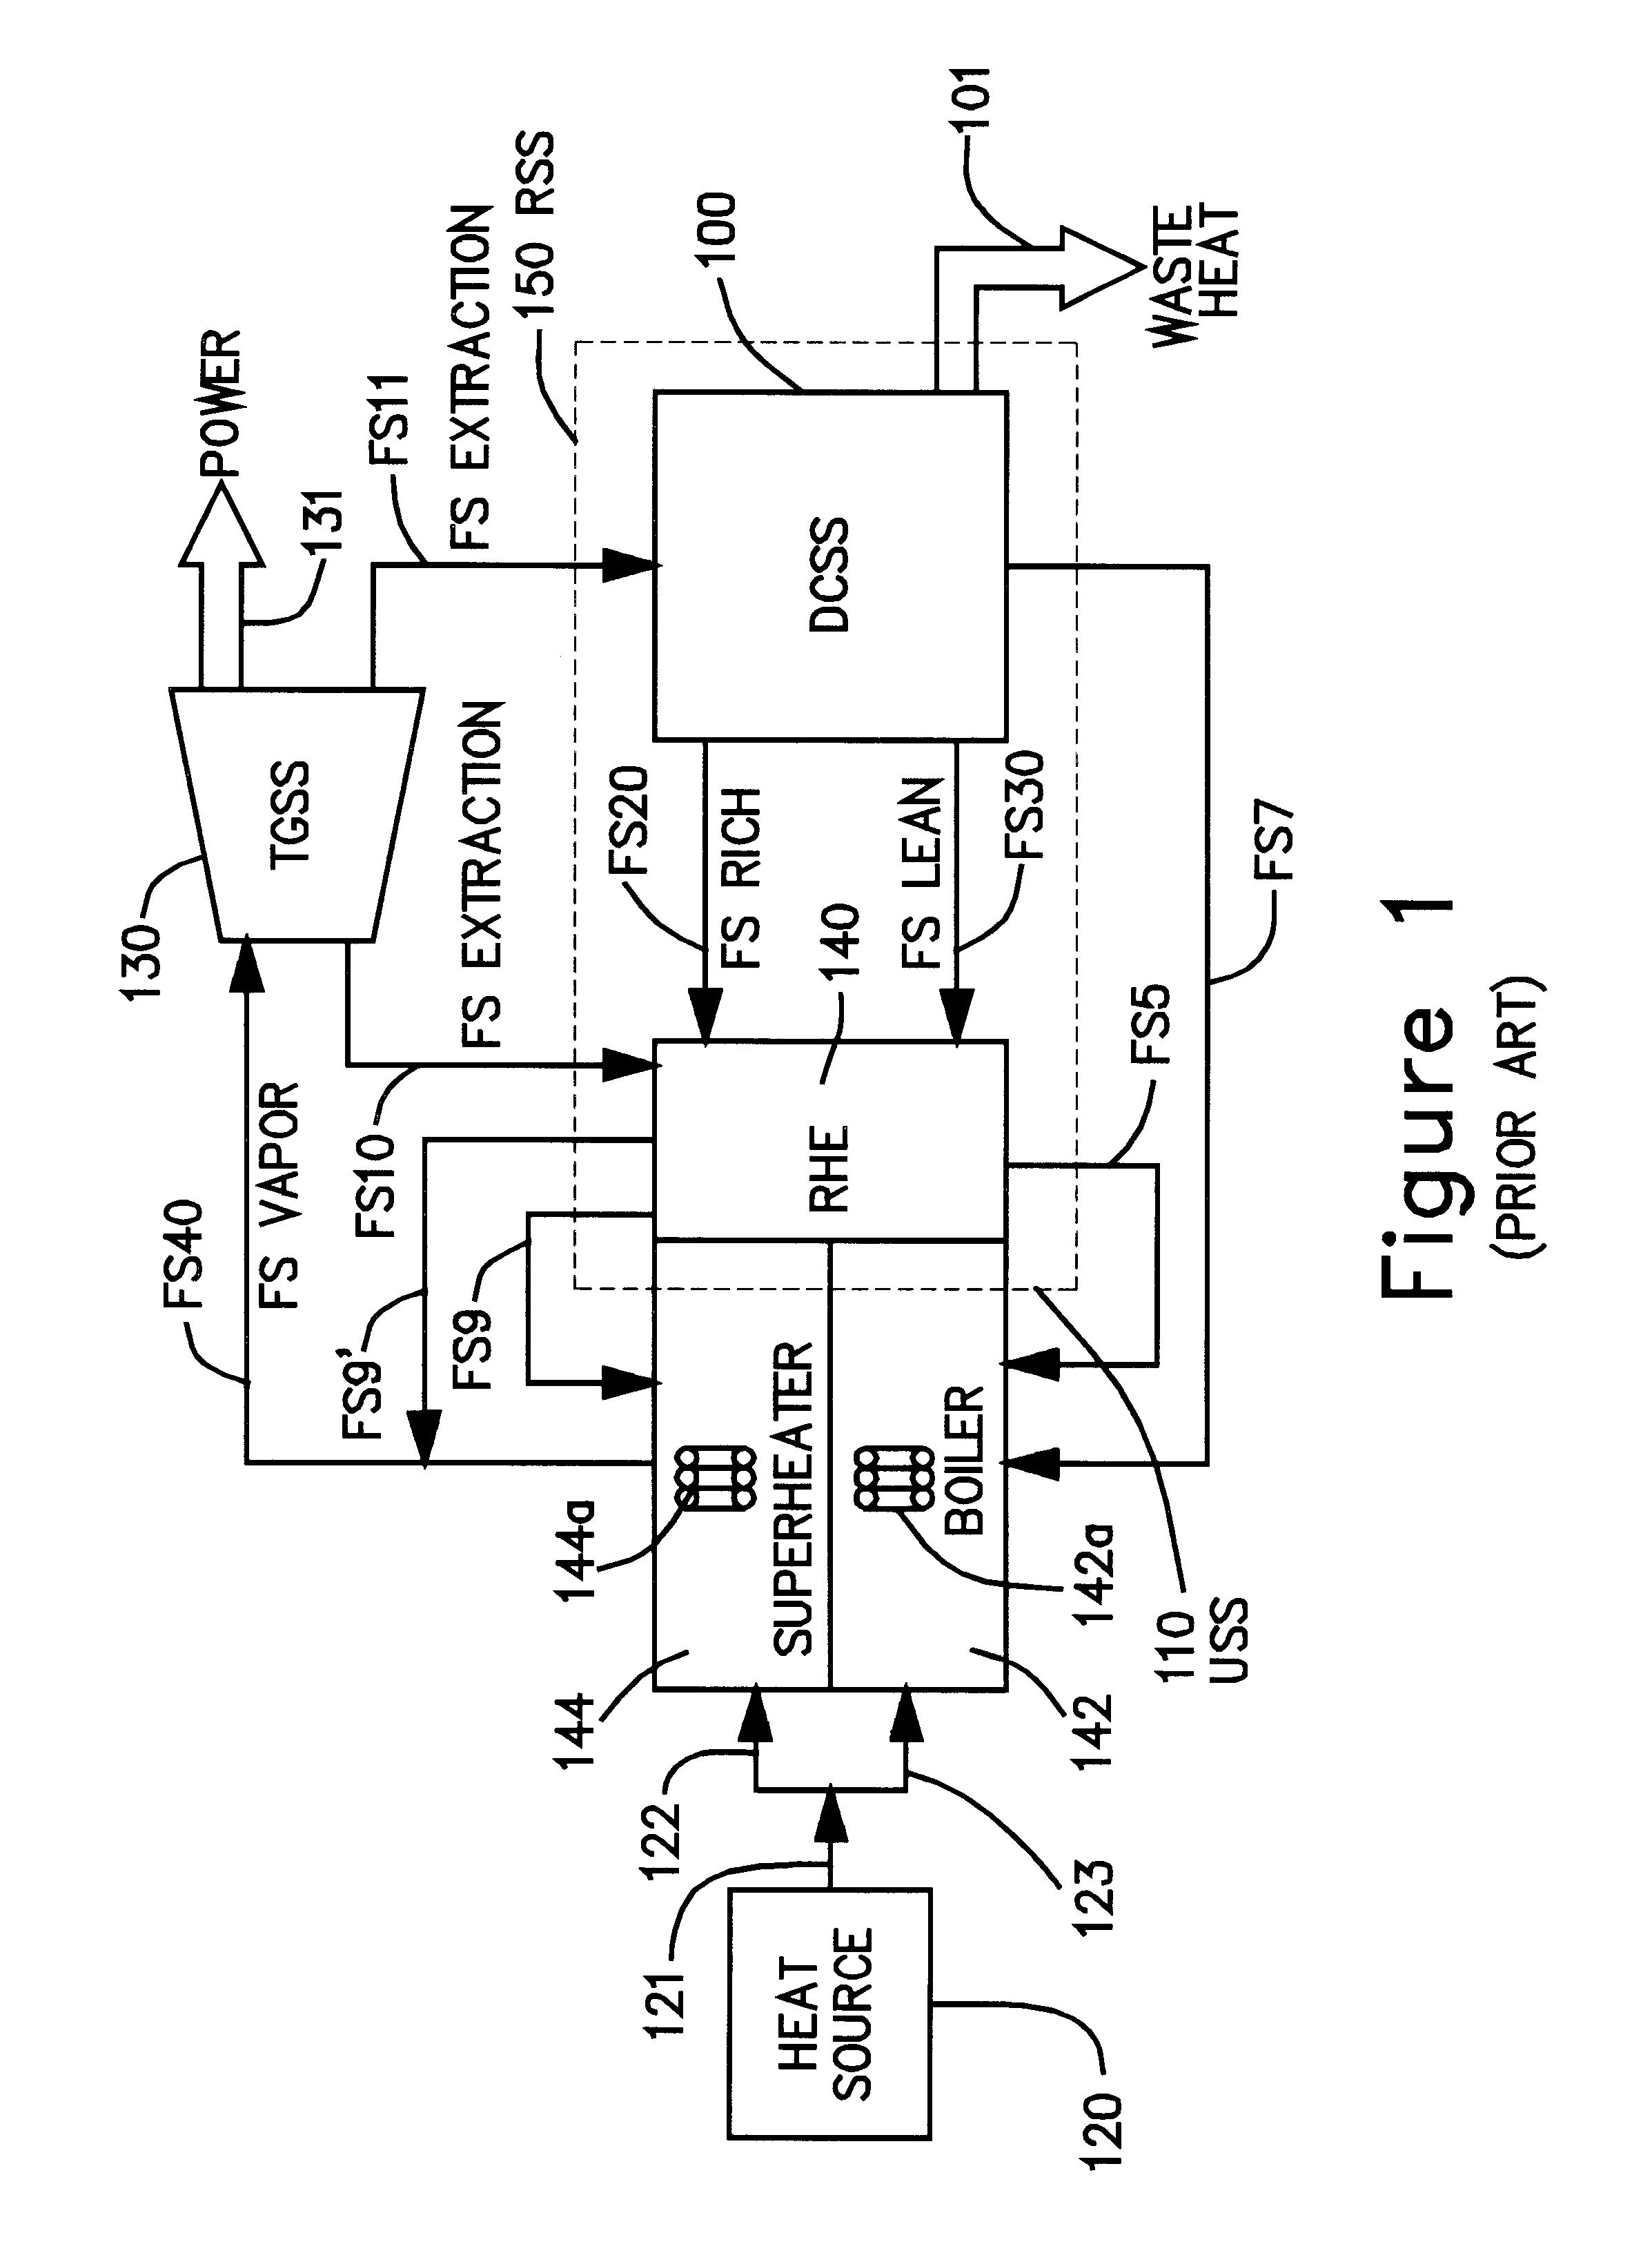 Vapor temperature control in a kalina cycle power generation system